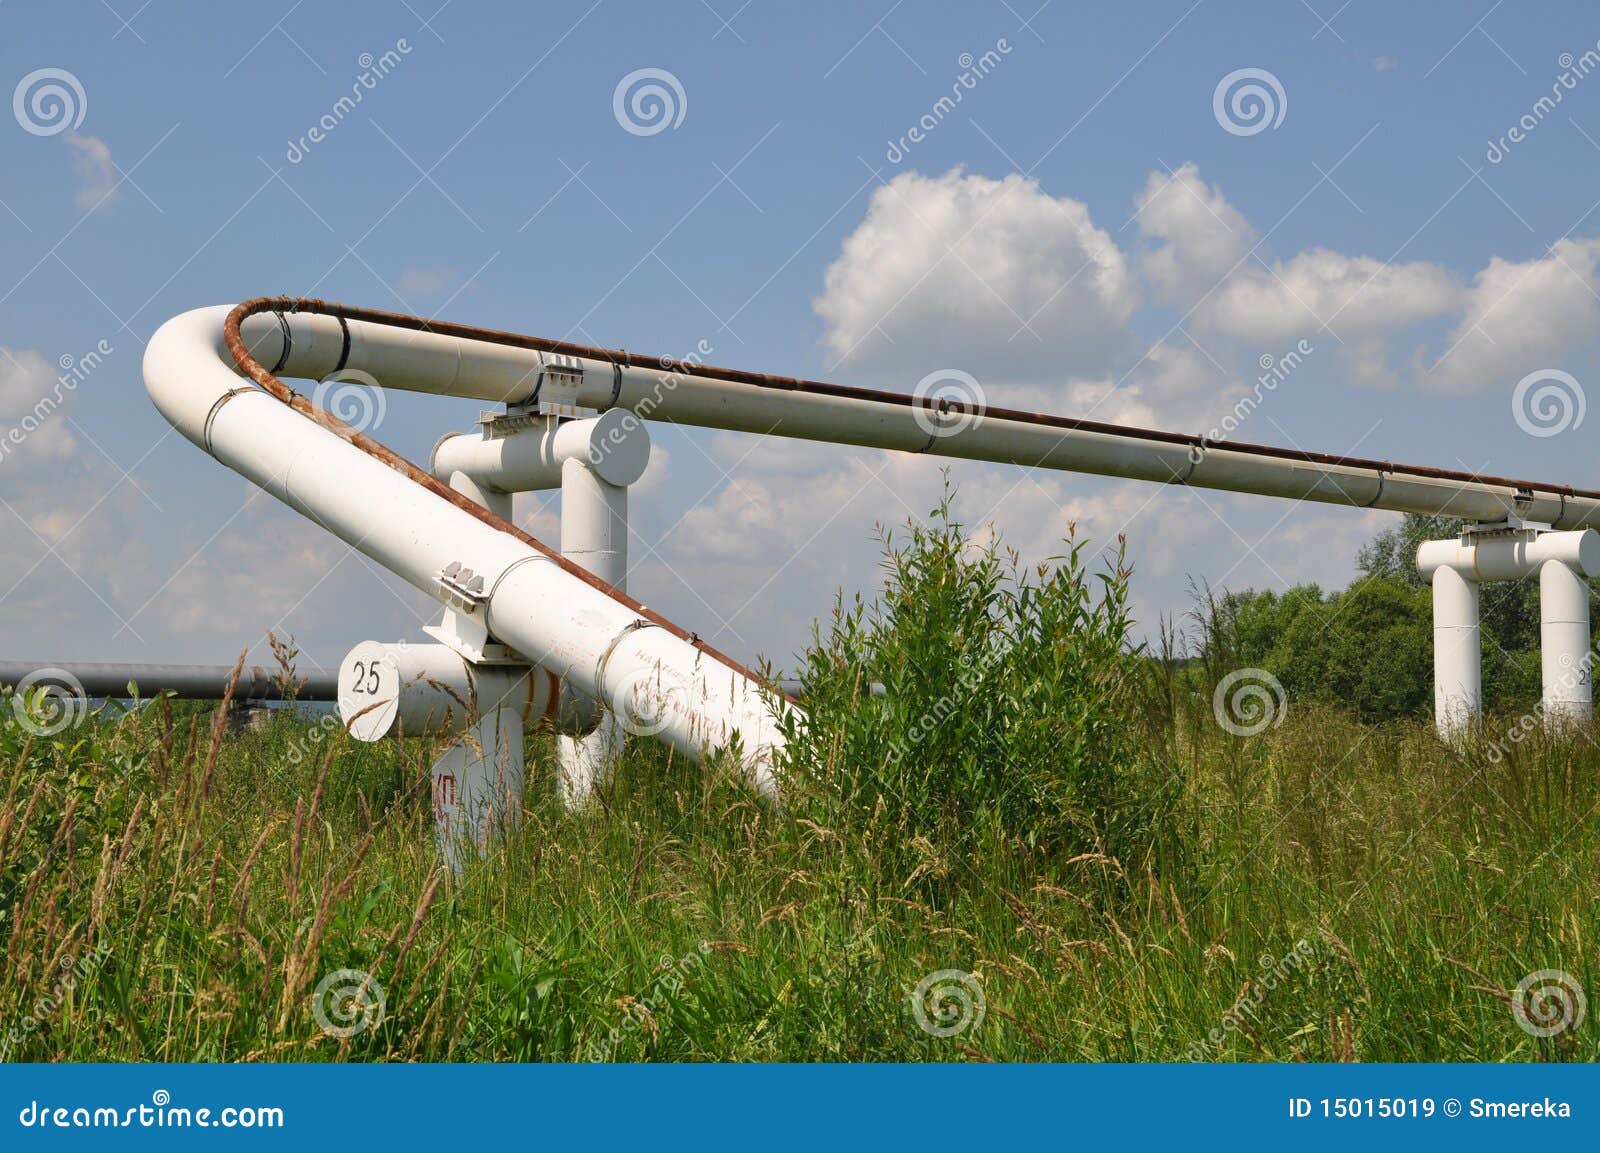 The main oil pipeline of a high pressure in a summer landscape under 